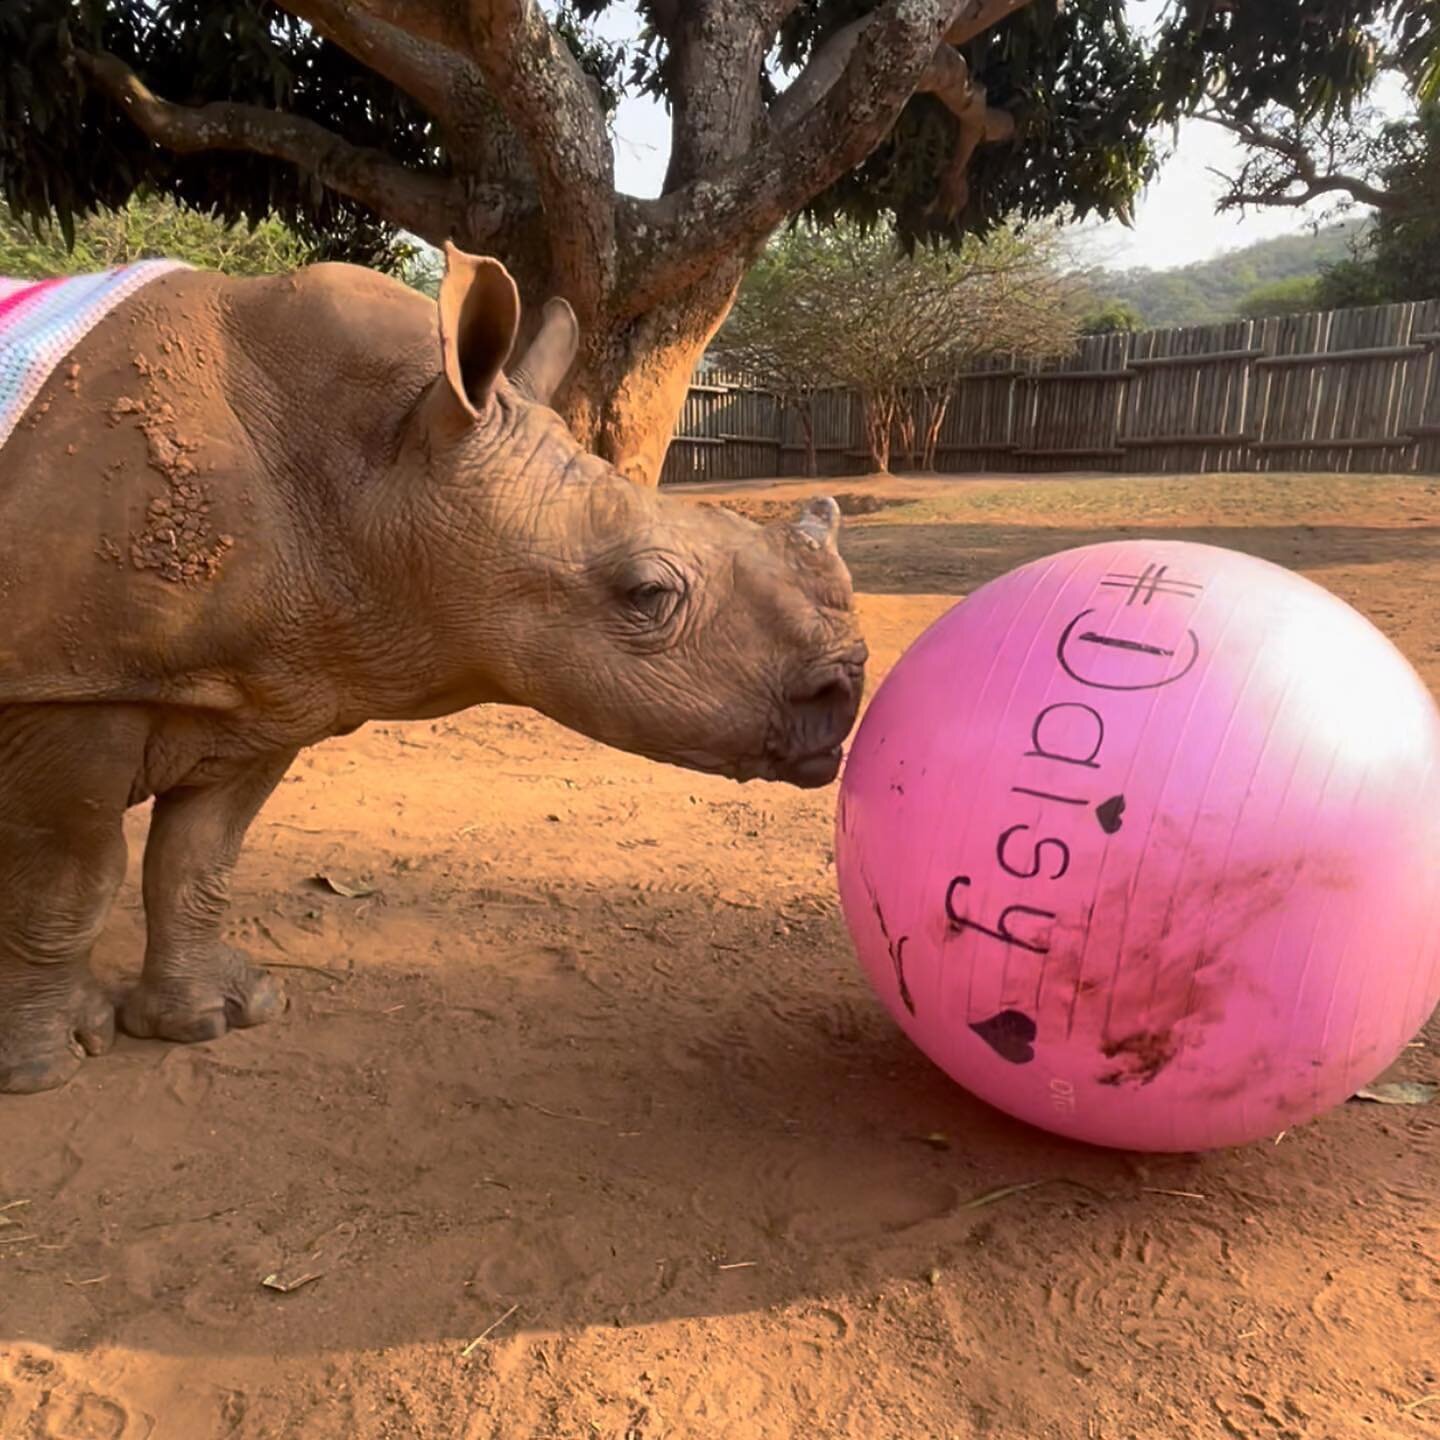 🤍🦏 #regram &bull; @careforwild DAISY UPDATE 🌸 

Daisy is feeling fabulous this Friday! To celebrate Daisy&rsquo;s milestone weigh in of over 200kg, a very kind family who were volunteering at Care for Wild, bought Daisy a giant pink yoga ball to p